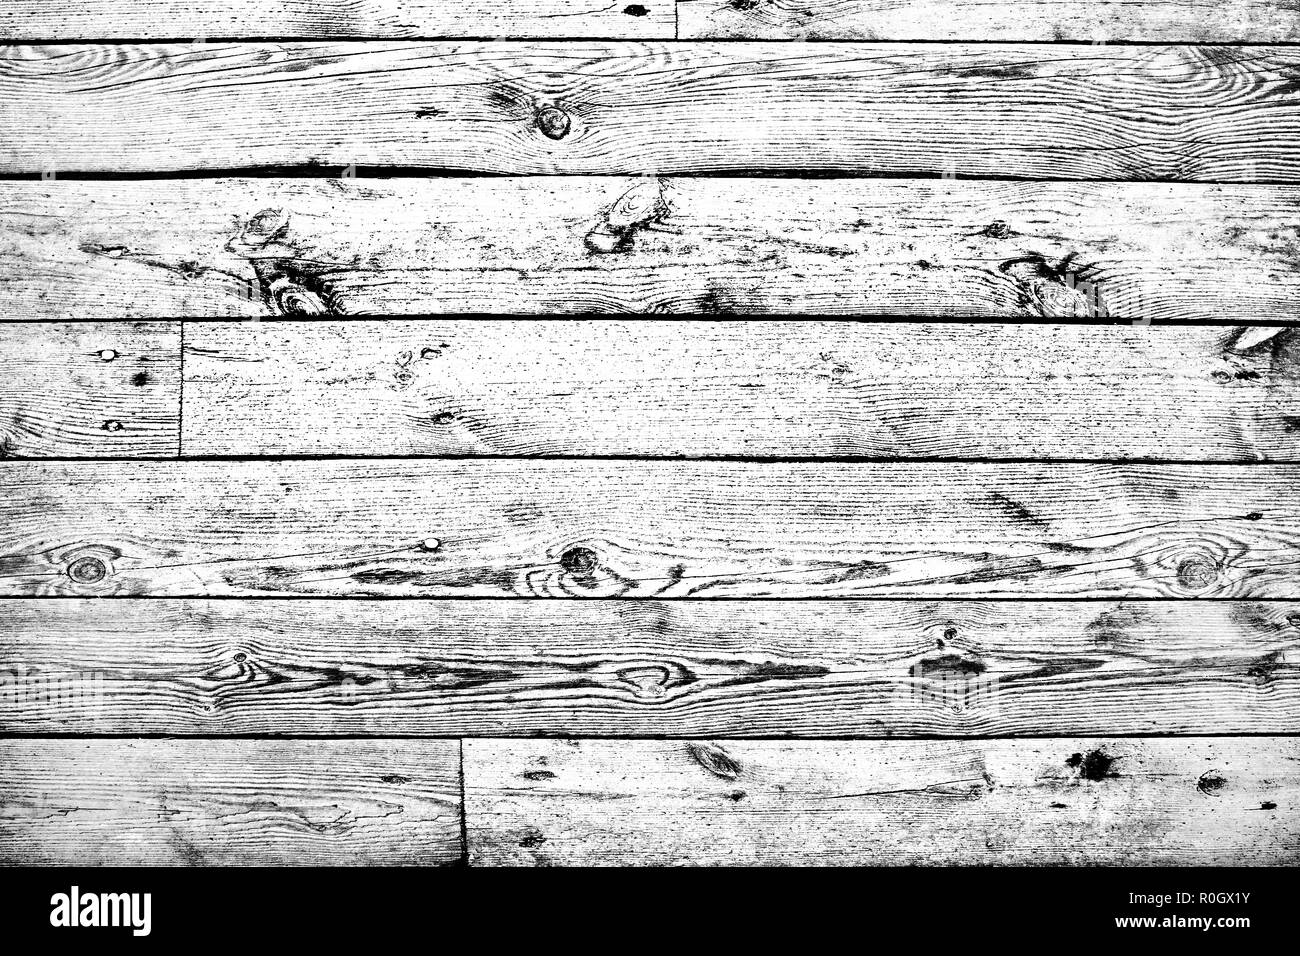 Trendy black and white high contrast wooden background or texture, desaturated hdr image Stock Photo